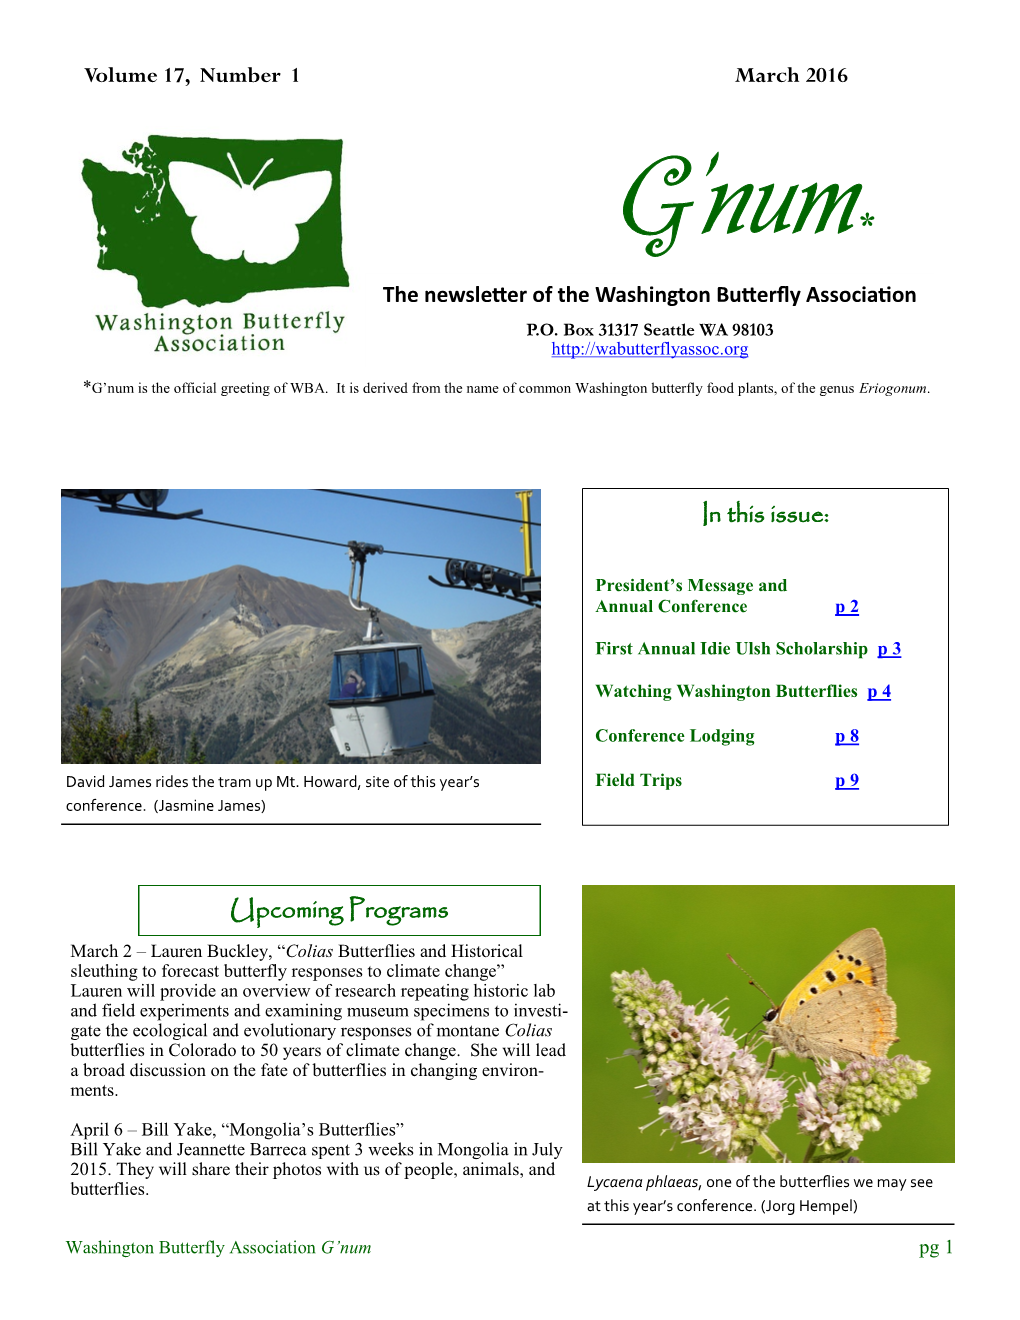 In This Issue: Upcoming Programs